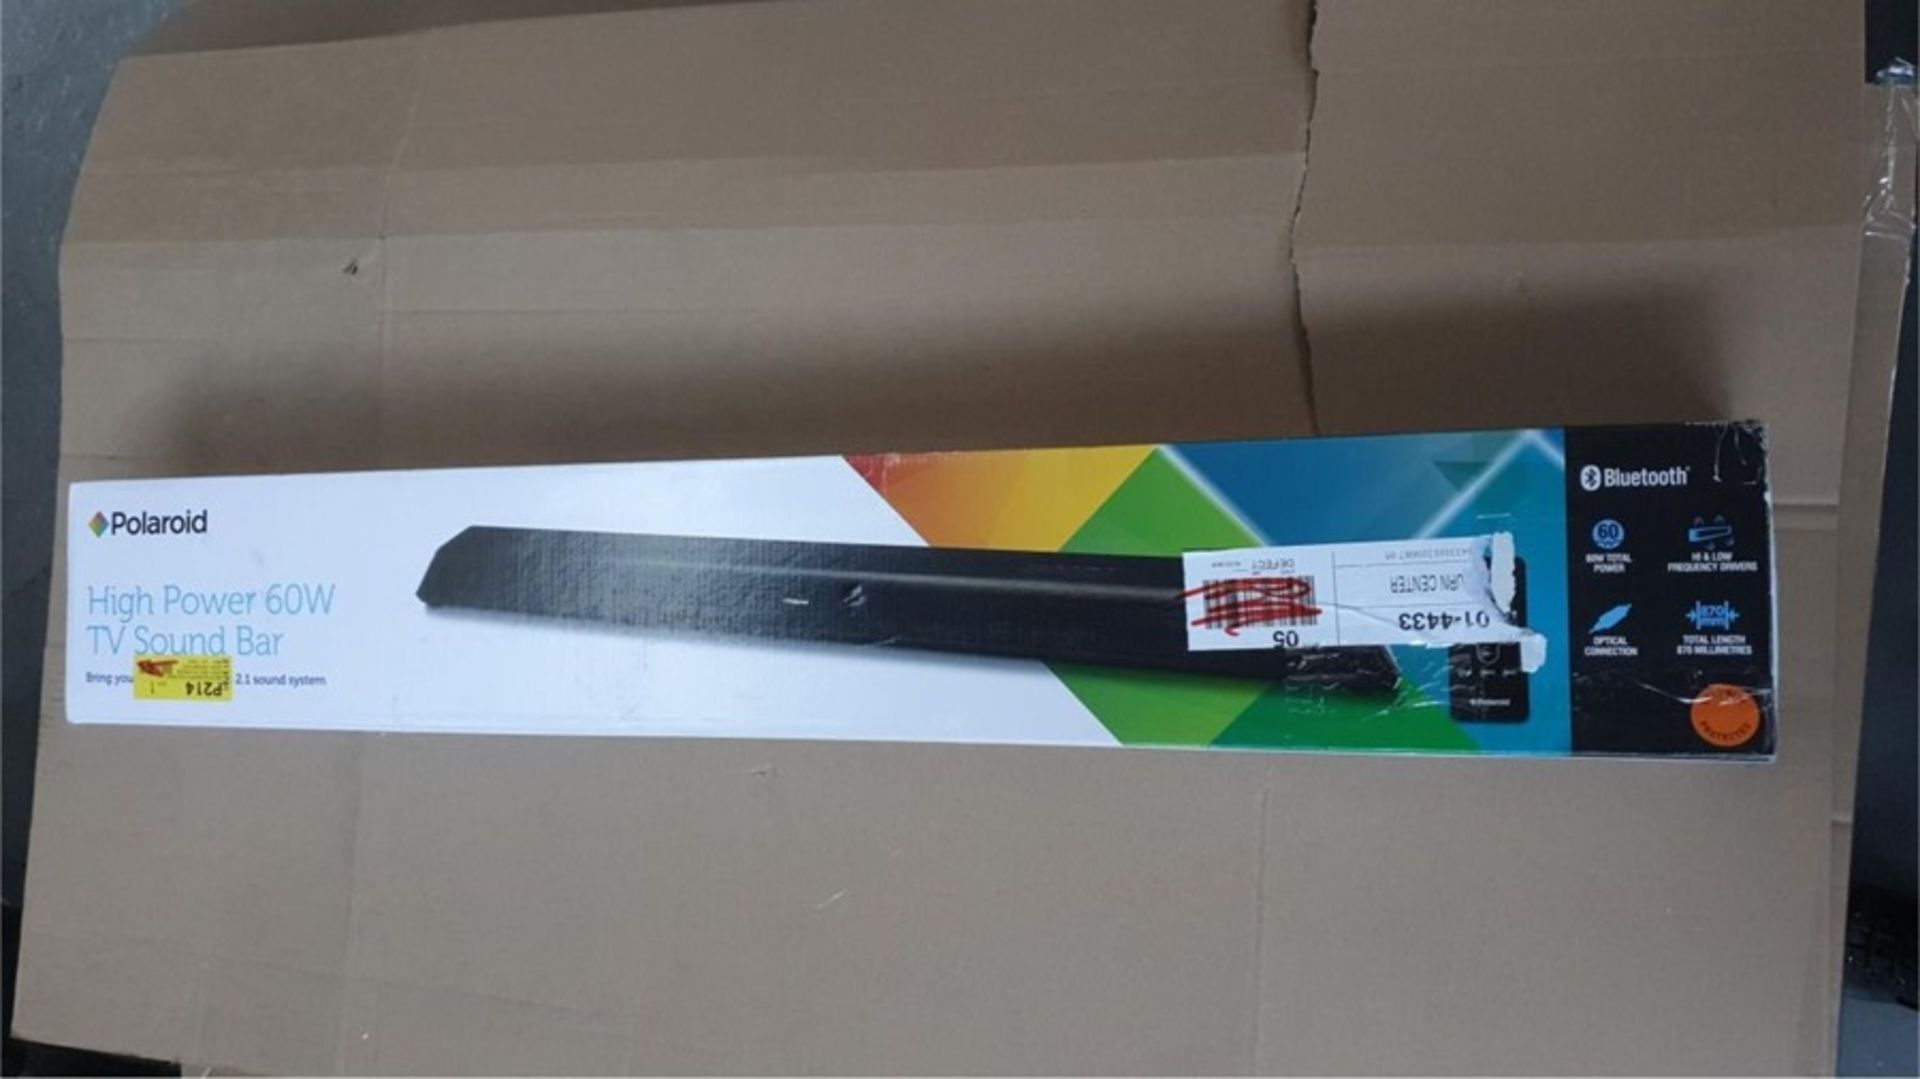 1 BOXED POLAROID HIGH POWER 60W TV SOUND BAR / RRP £59.00 - BL -3781 (VIEWING HIGHLY RECOMMENDED)